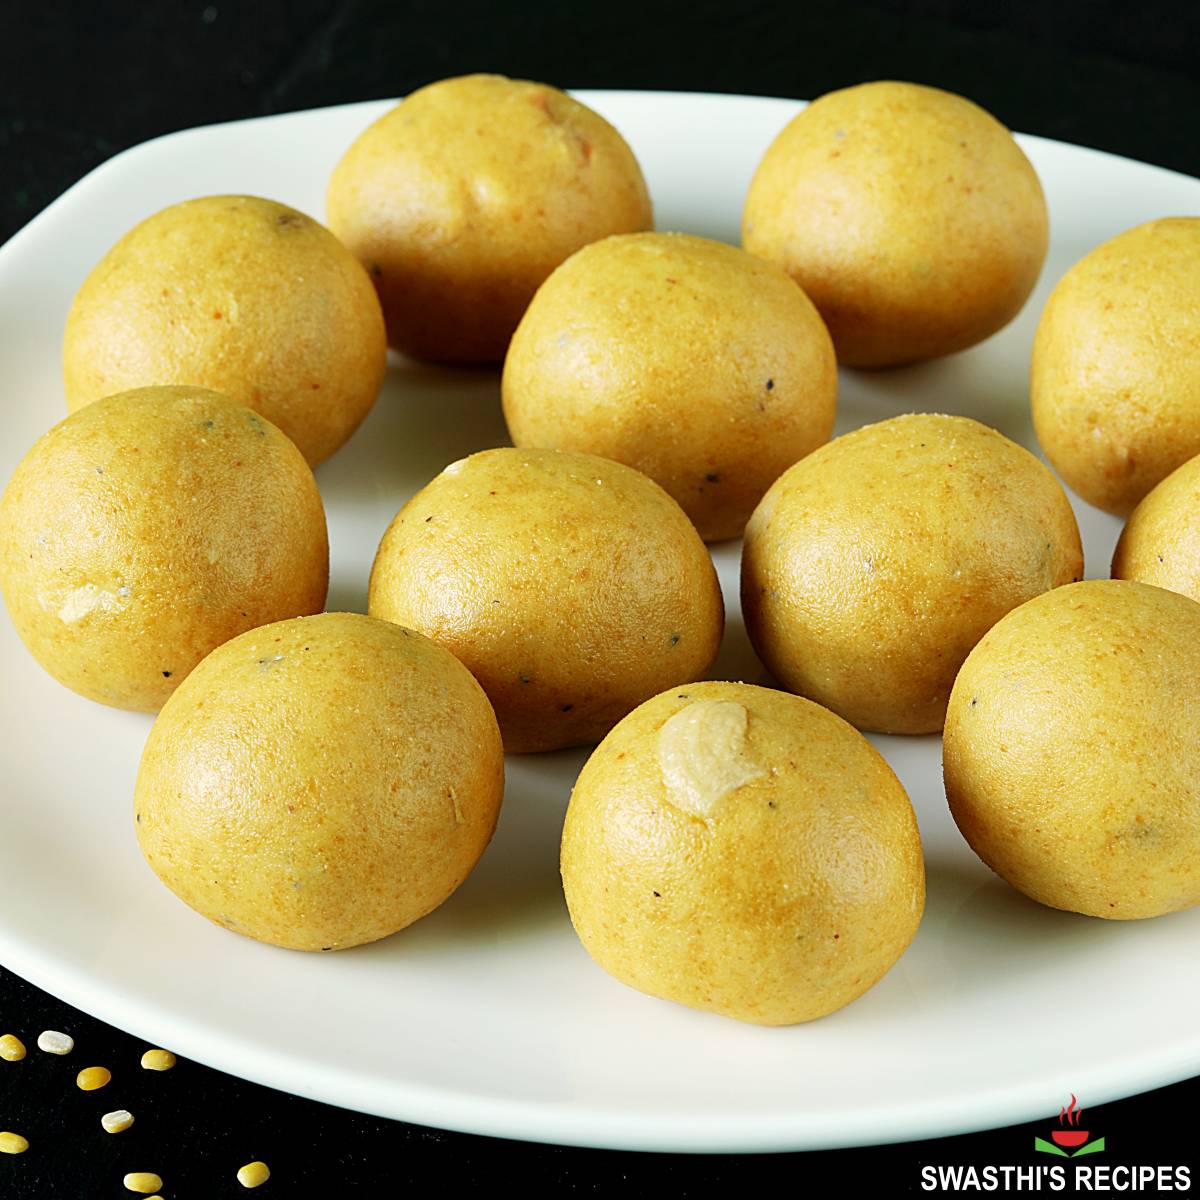 moong dal laddu made with yellow lentils